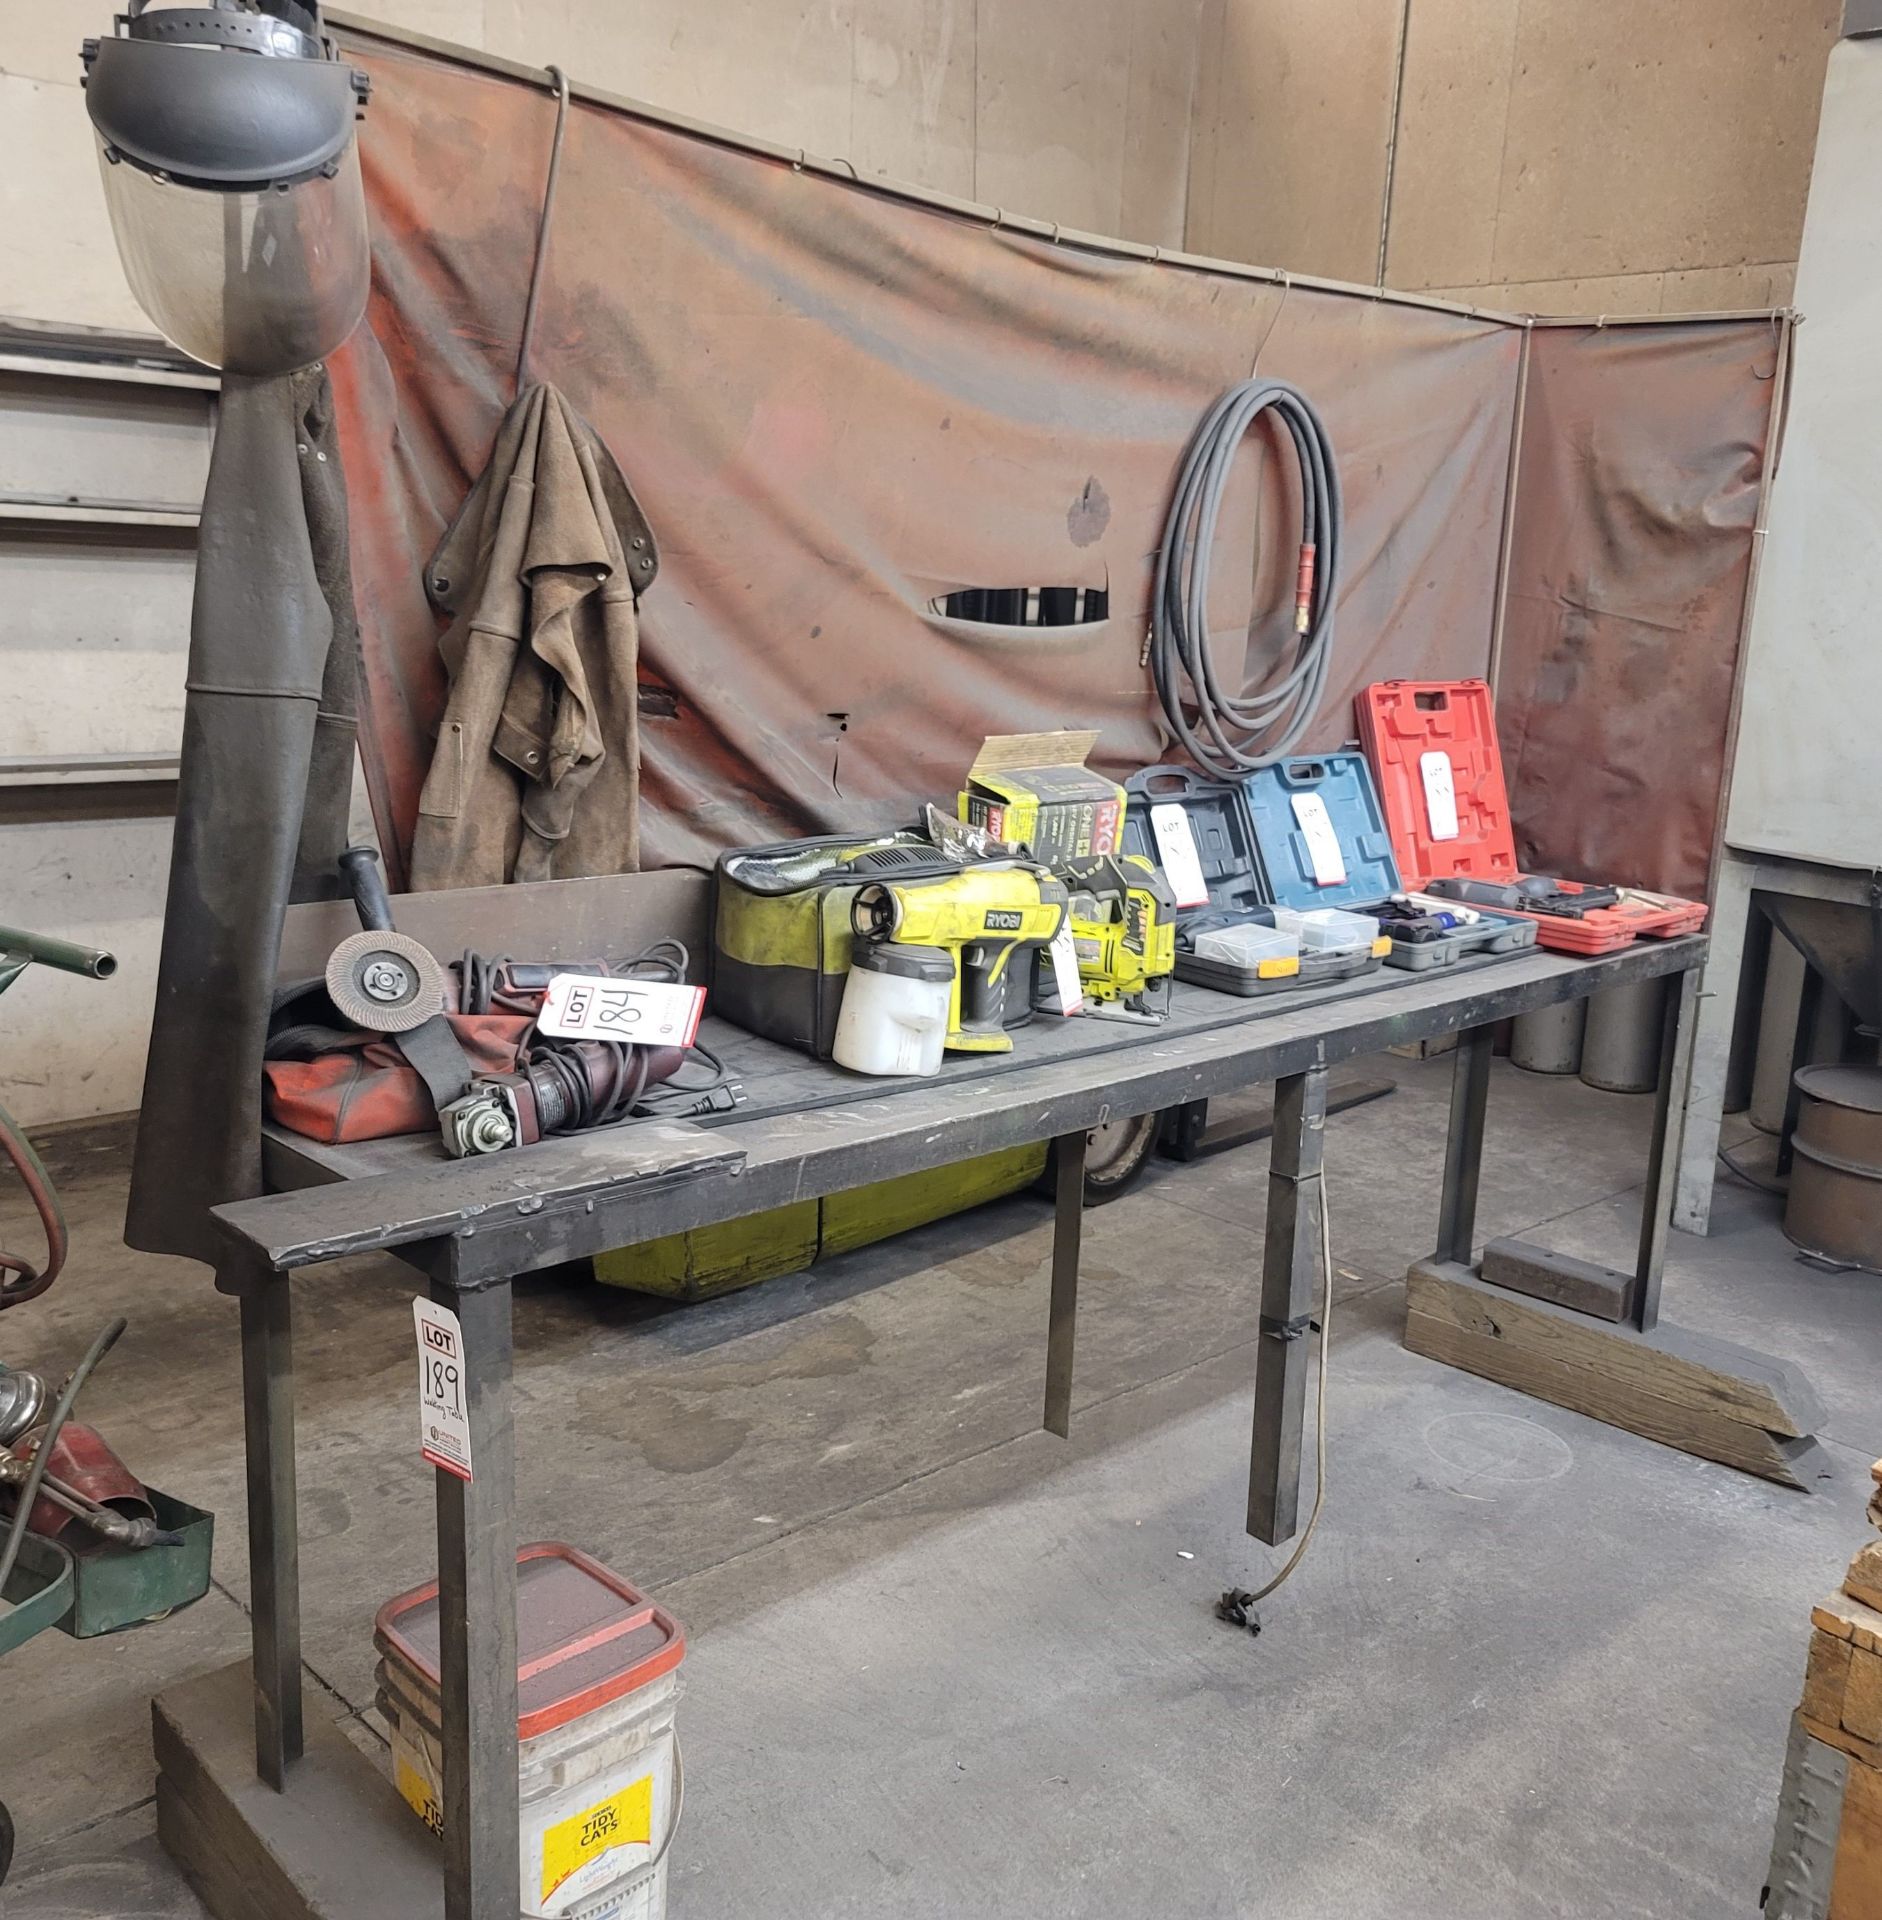 WELDING TABLE, 10' X 18" X 1/4" TOP, W/ CURTAIN, ITEMS ON TOP OF TABLE NOT INCLUDED